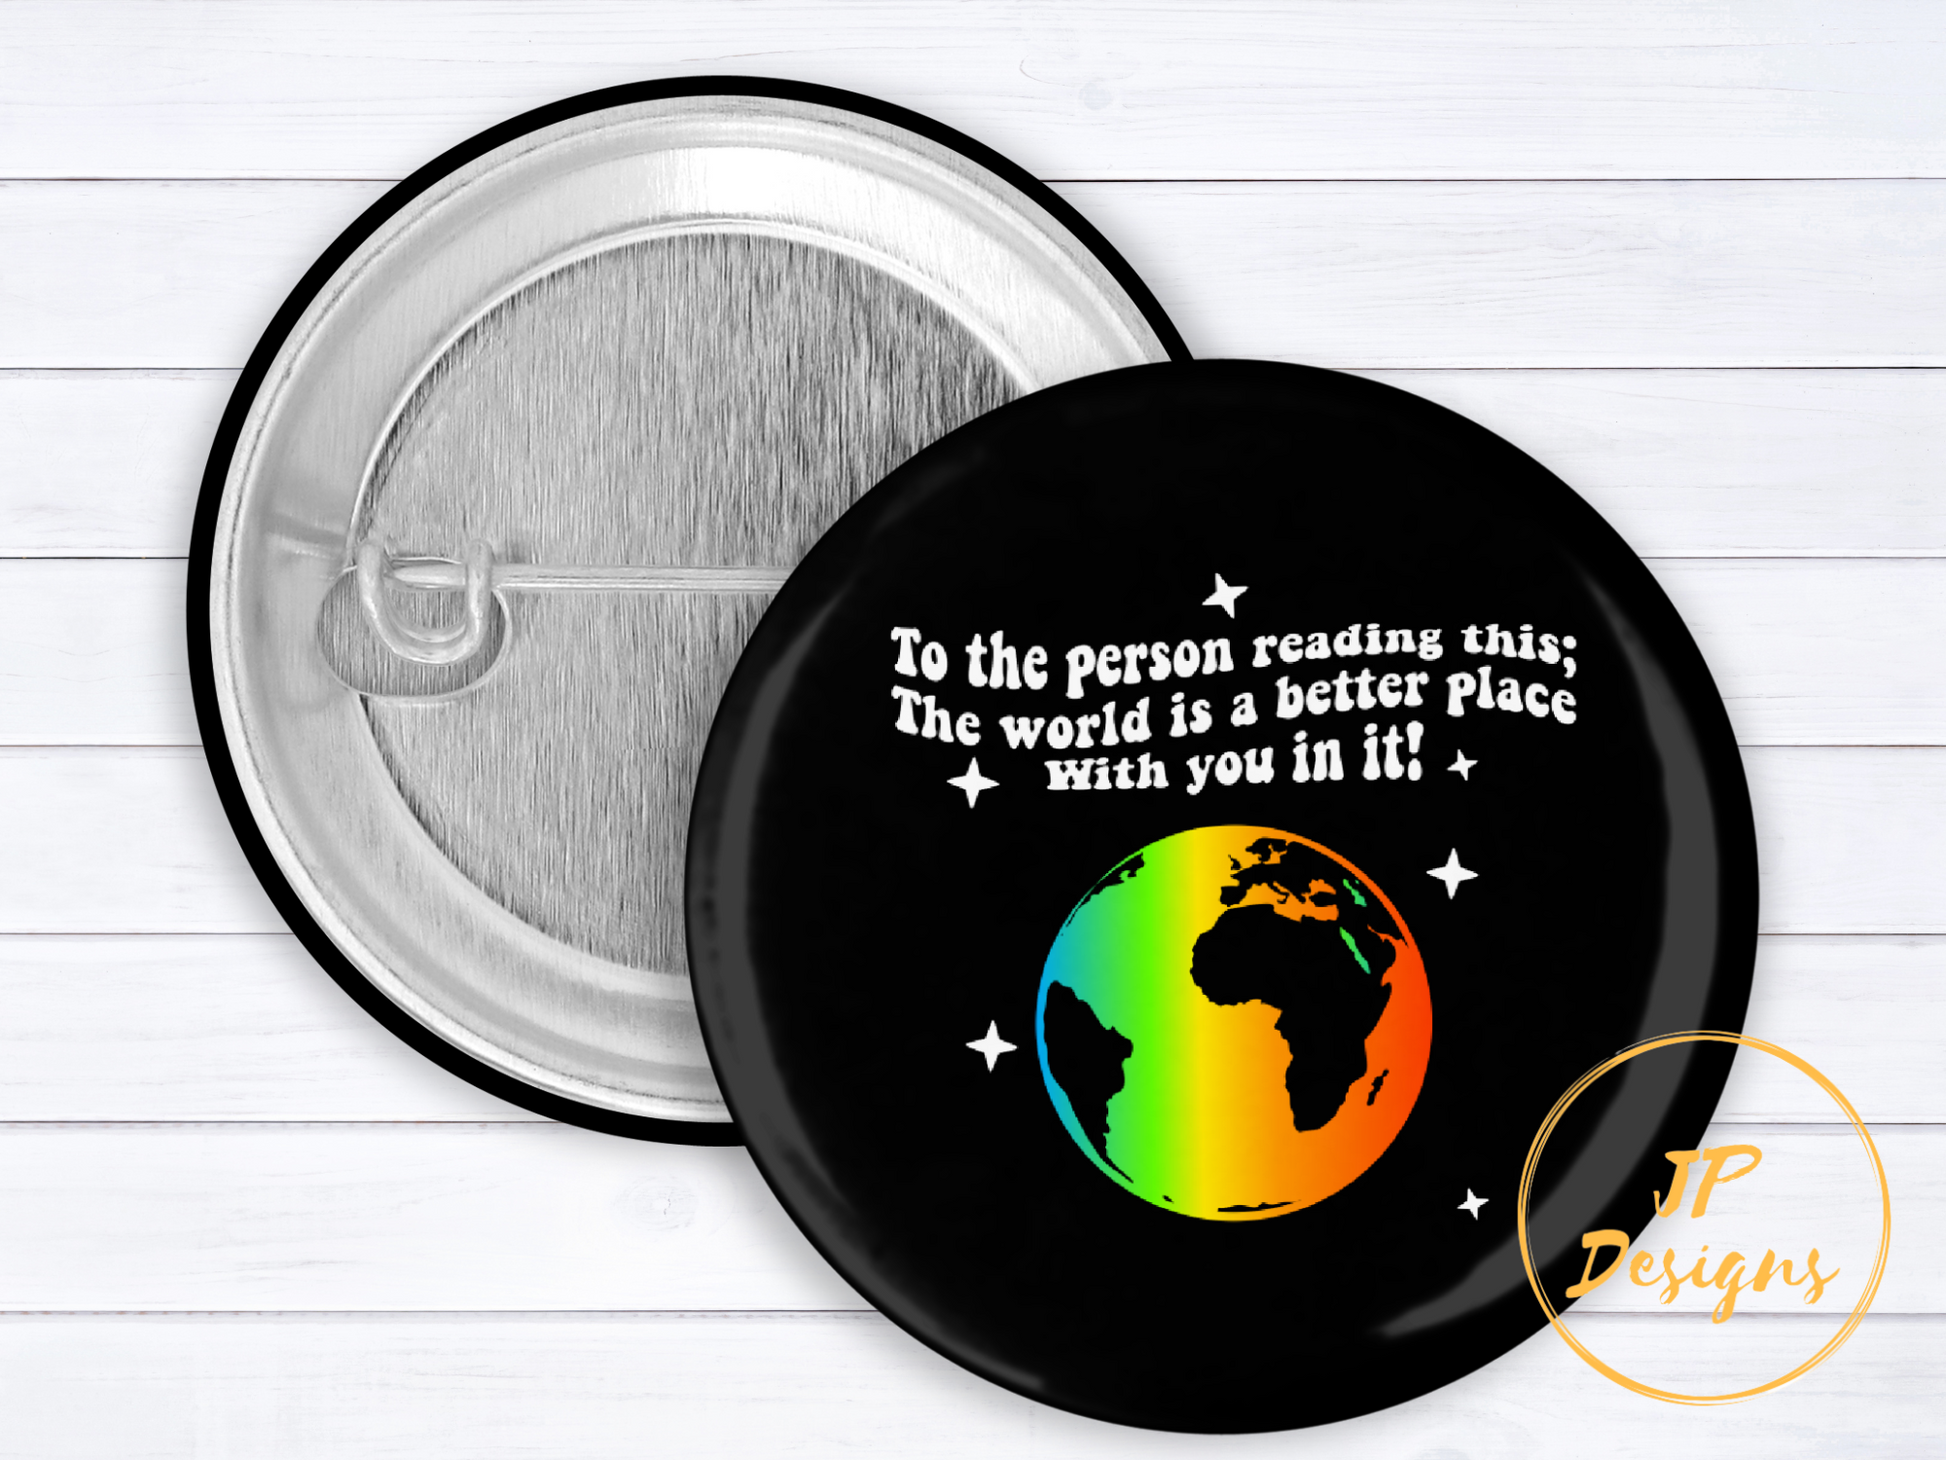 The World Is Better With You In It Pinback Button, To the Person Reading This Suicide Prevention and Awareness Pinback Button